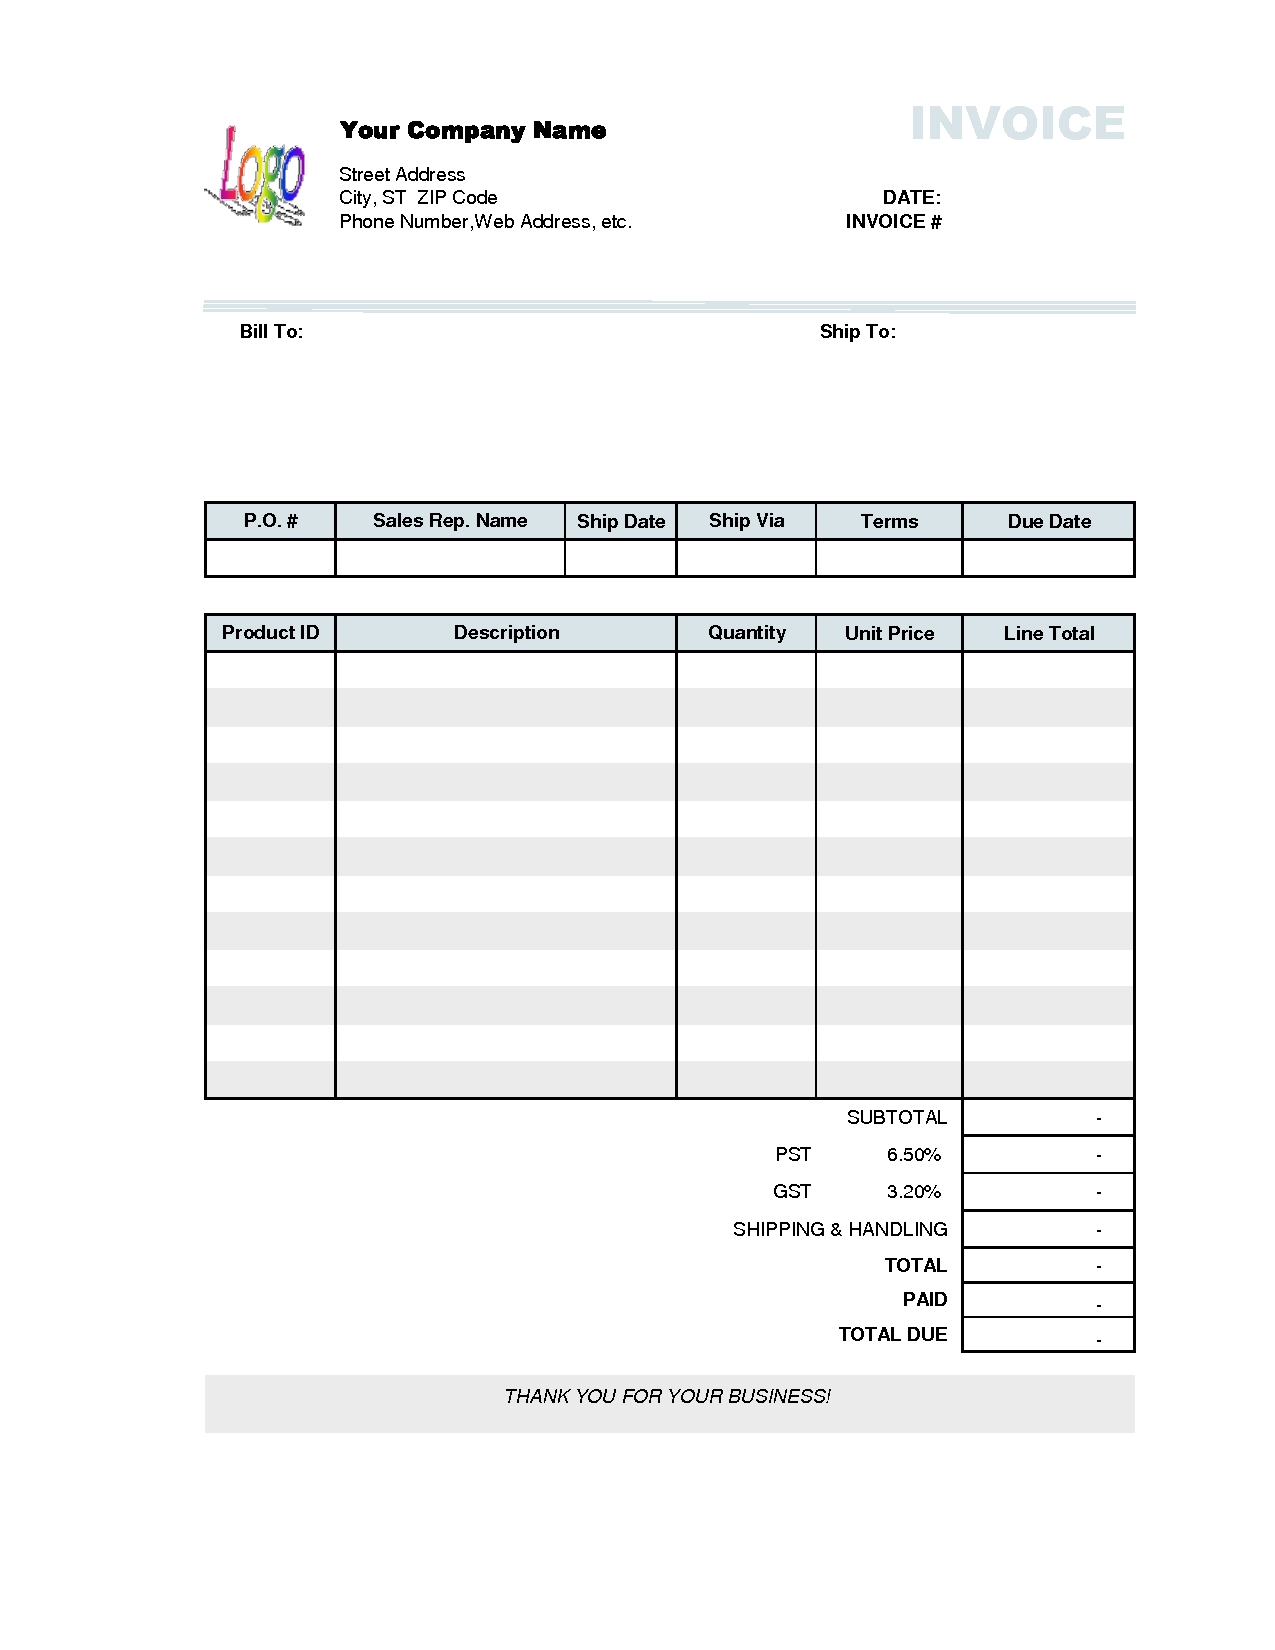 online business invoice template robinhobbs business invoices online